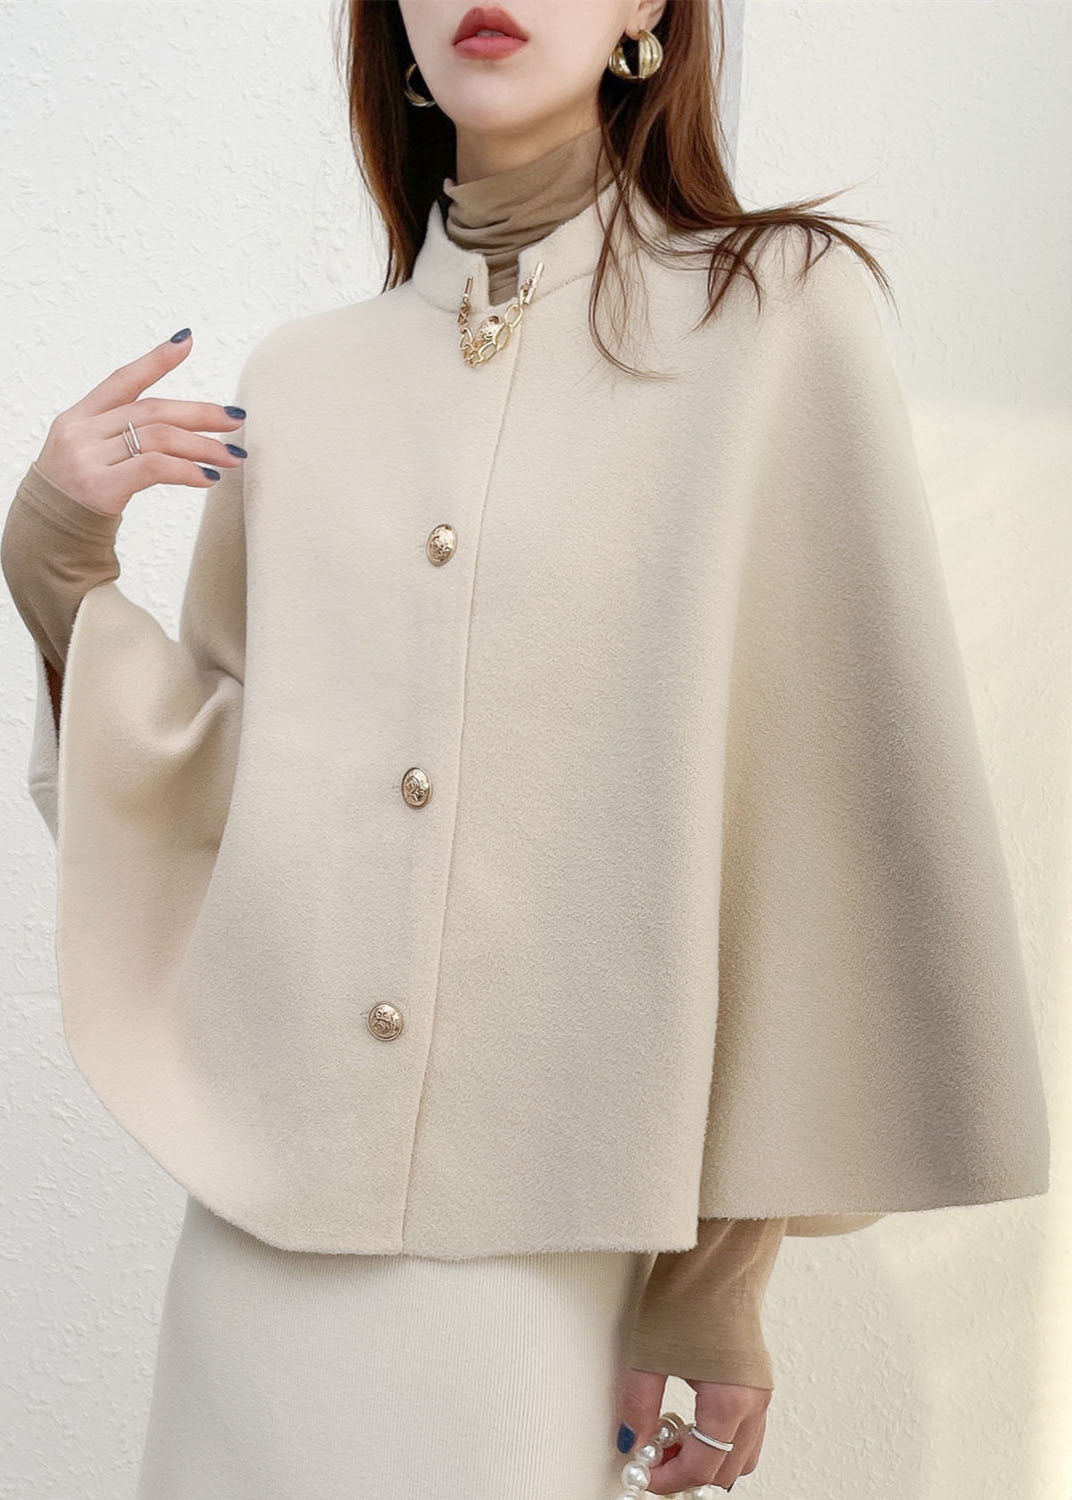 Solid White Thick Woolen Cloak Coats Stand Collar Button Fall